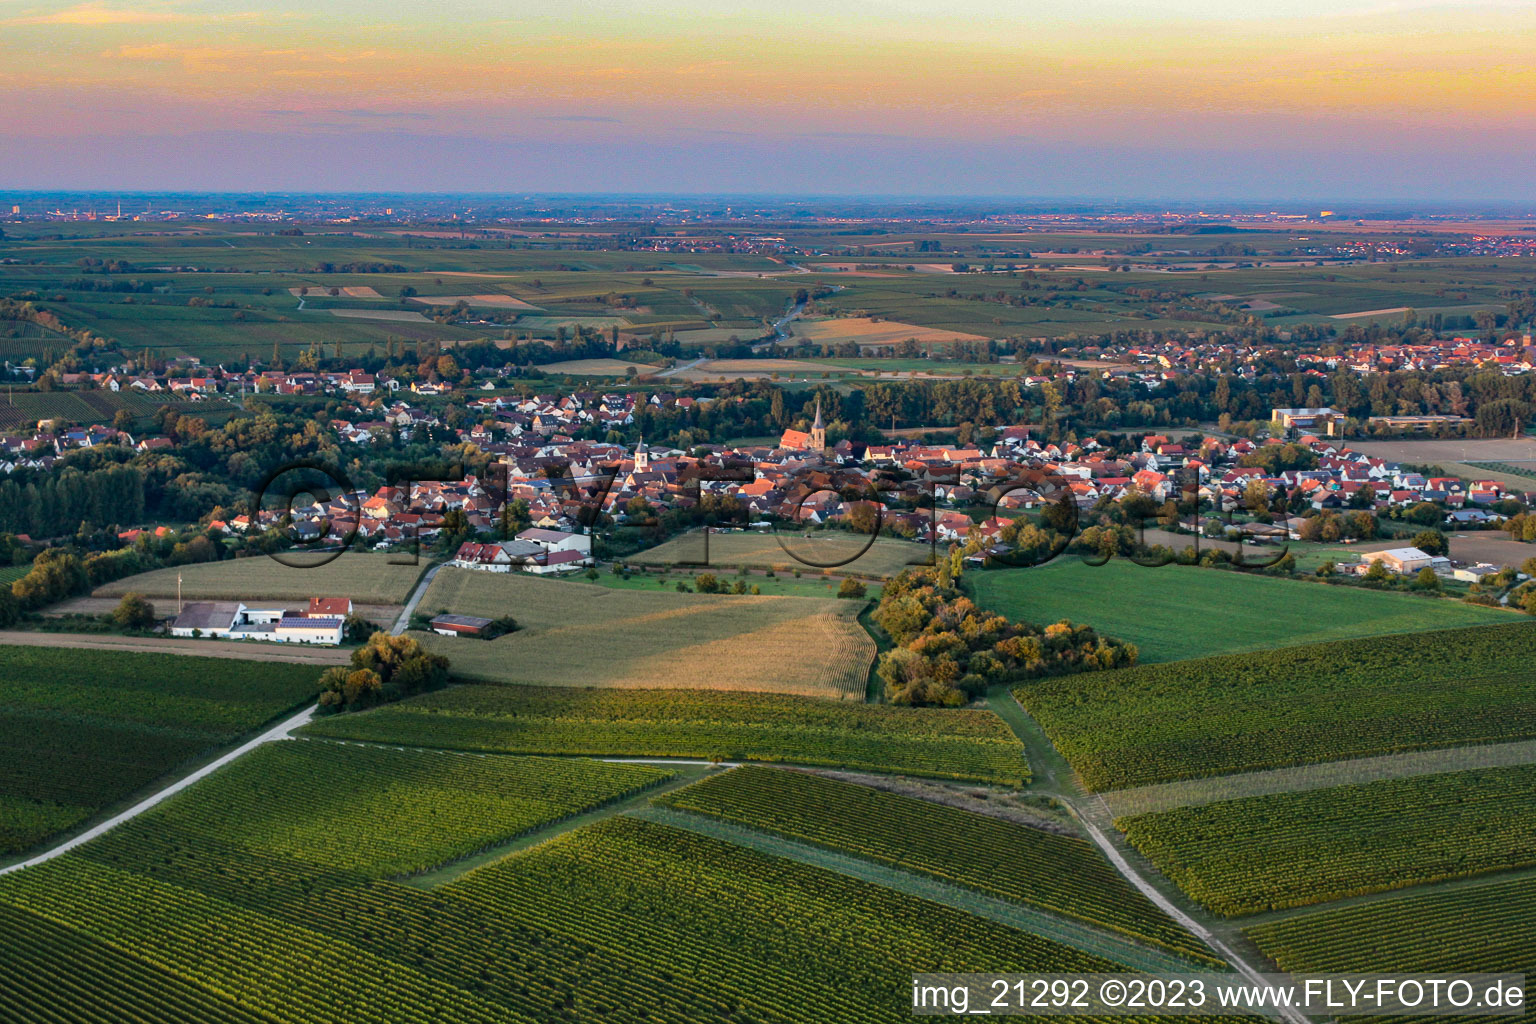 District Ingenheim in Billigheim-Ingenheim in the state Rhineland-Palatinate, Germany from the drone perspective